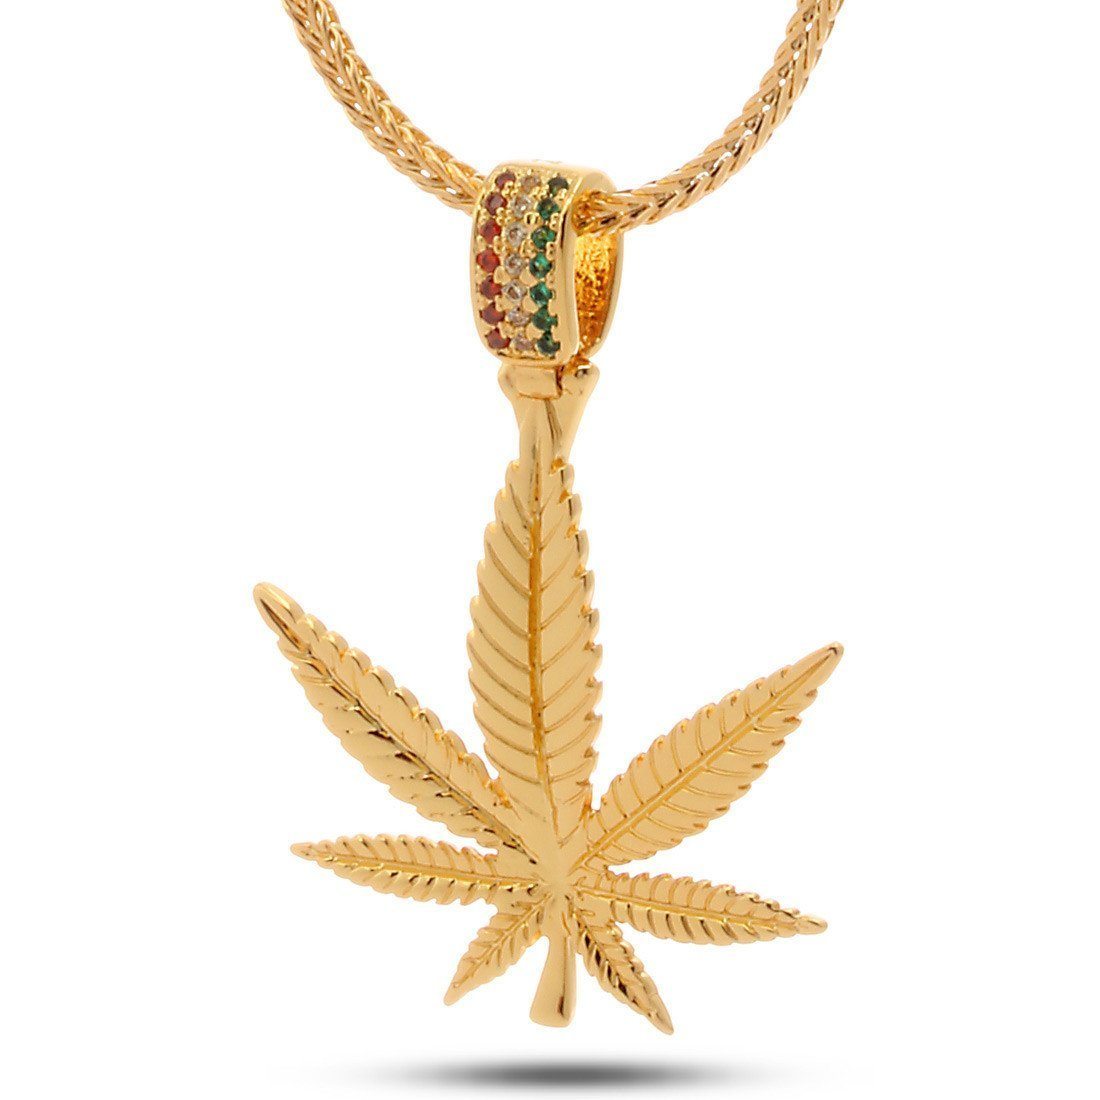 Image of The Weed Leaf Necklace - Designed by Snoop Dogg x King Ice